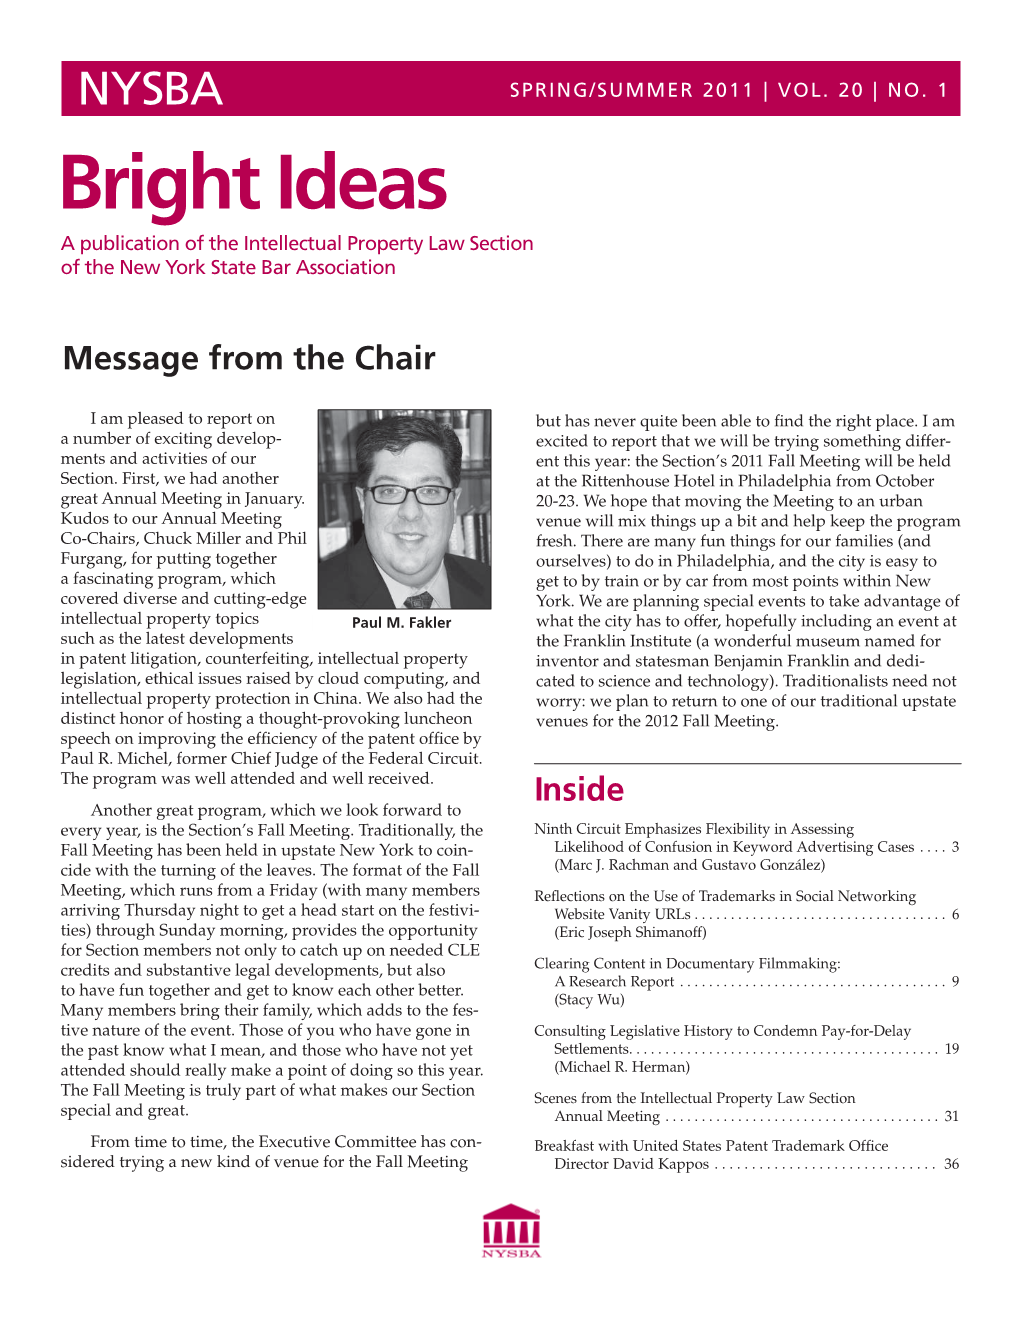 Bright Ideas a Publication of the Intellectual Property Law Section of the New York State Bar Association